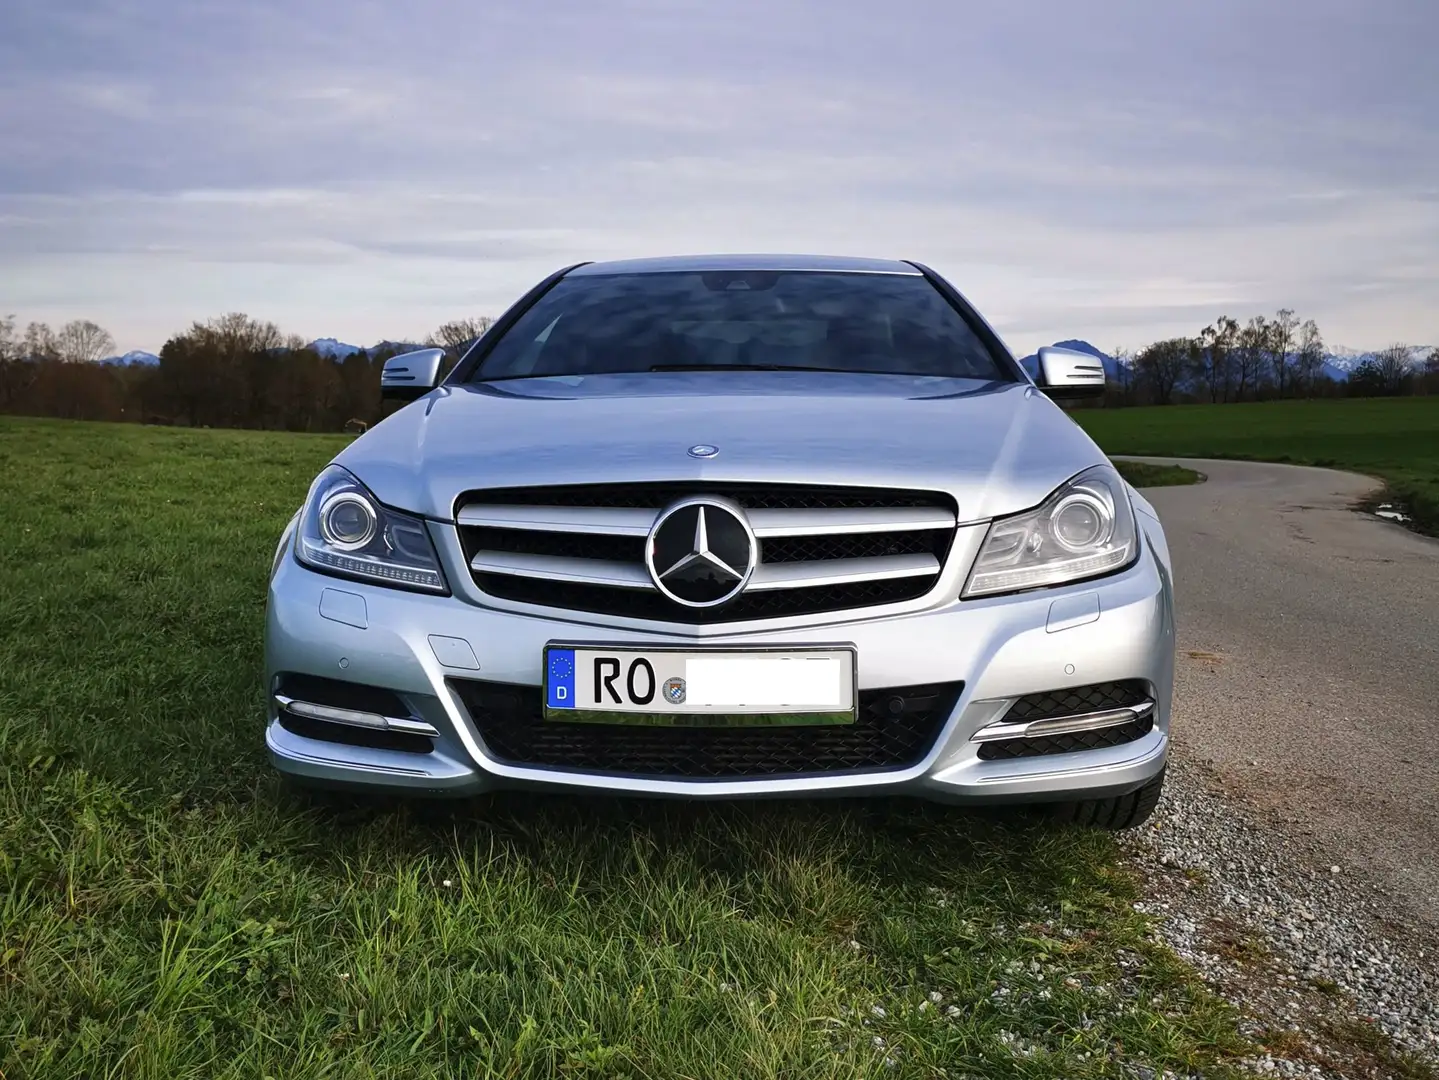 Mercedes-Benz C 220 CDI DPF Coupe (BlueEFFICIENCY) 7G-TRONIC Silver - 2